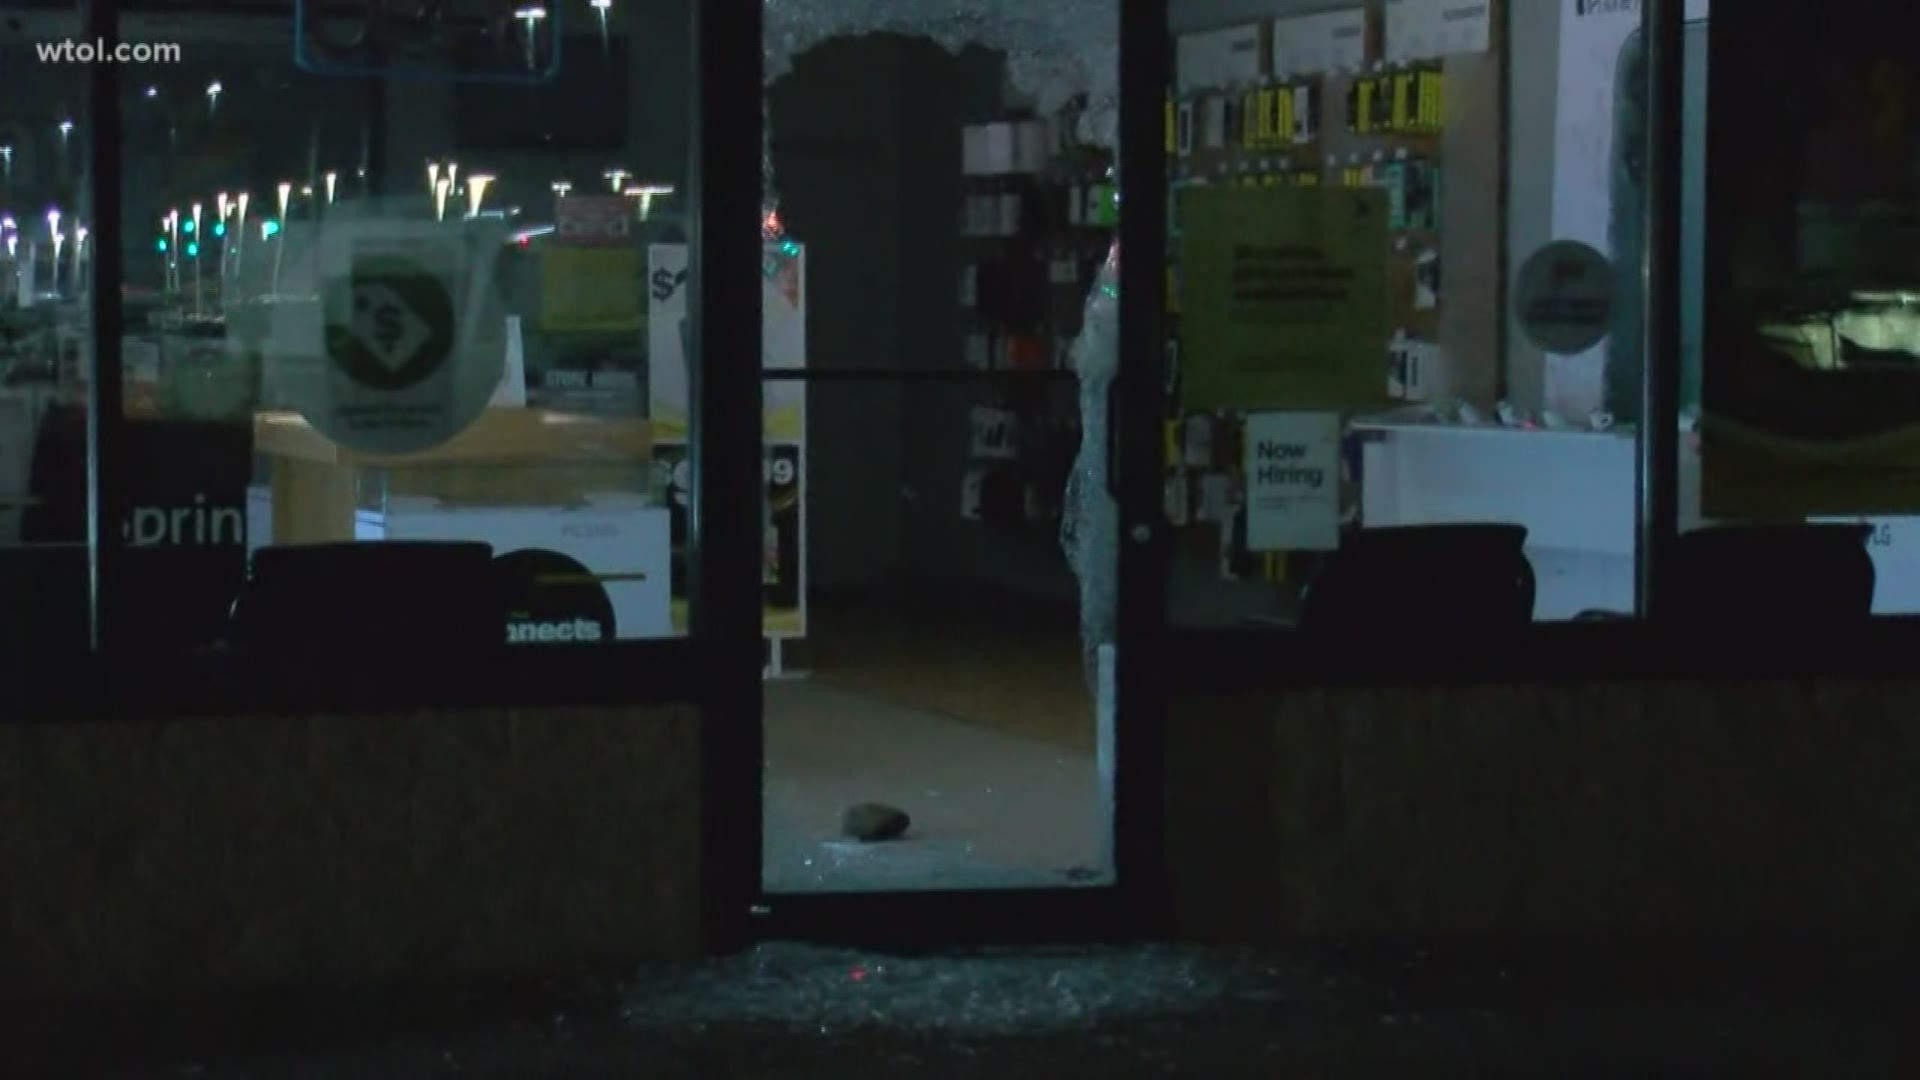 Police are looking for the people involved in a smash and grab at the Sprint store on Holland Sylvania.